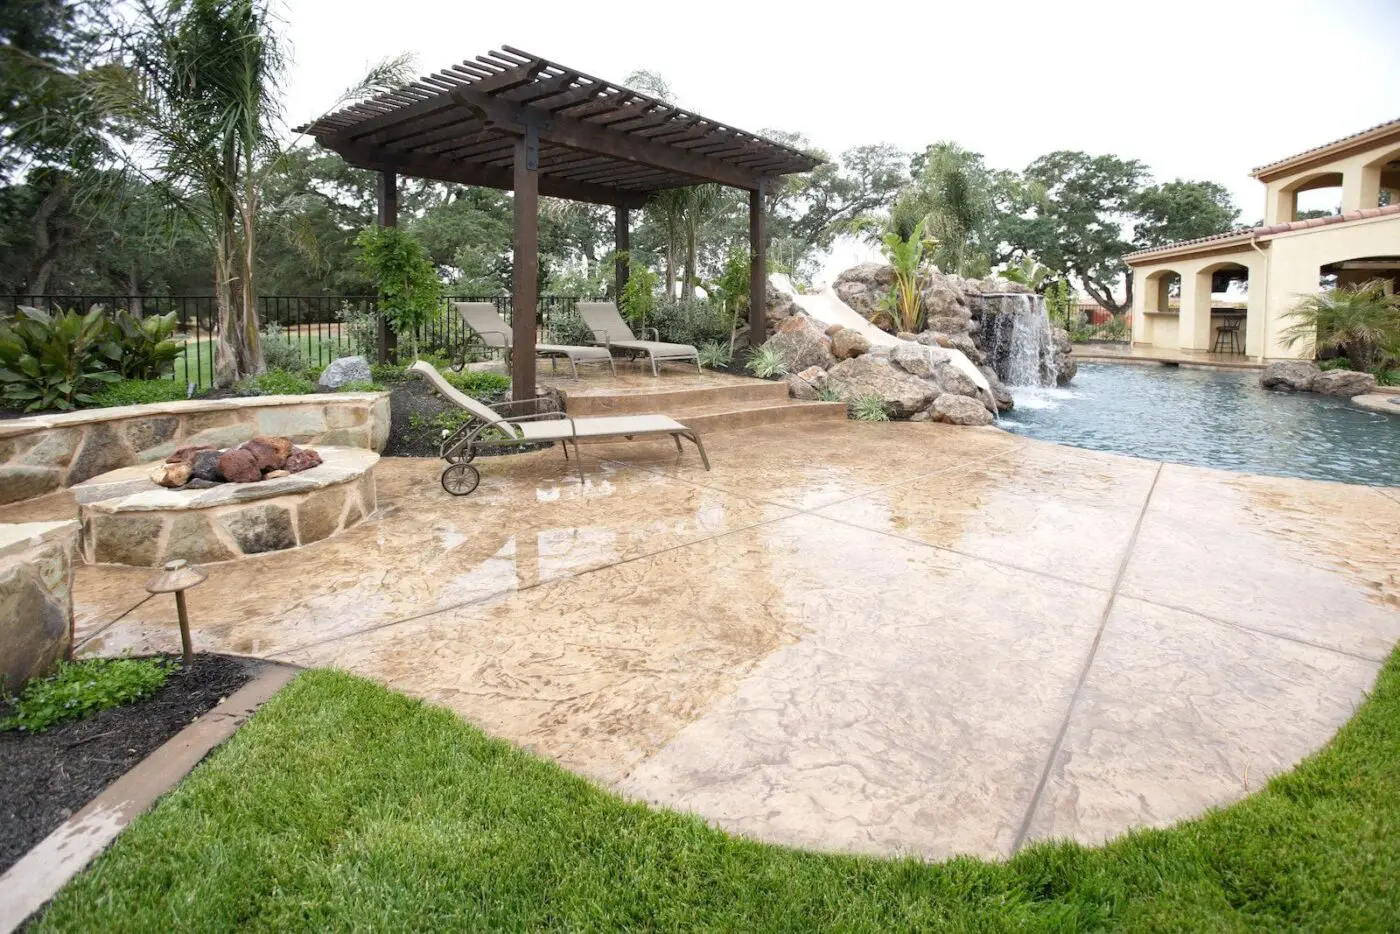 A luxurious backyard in Miami, FL features a stamped concrete patio with two reclining loungers and a shaded pergola. The pool area includes a waterfall and is surrounded by lush greenery and trees. A stone fire pit is near the pergola, while a large house stands majestically in the background, crafted by a top decorative concrete contractor.